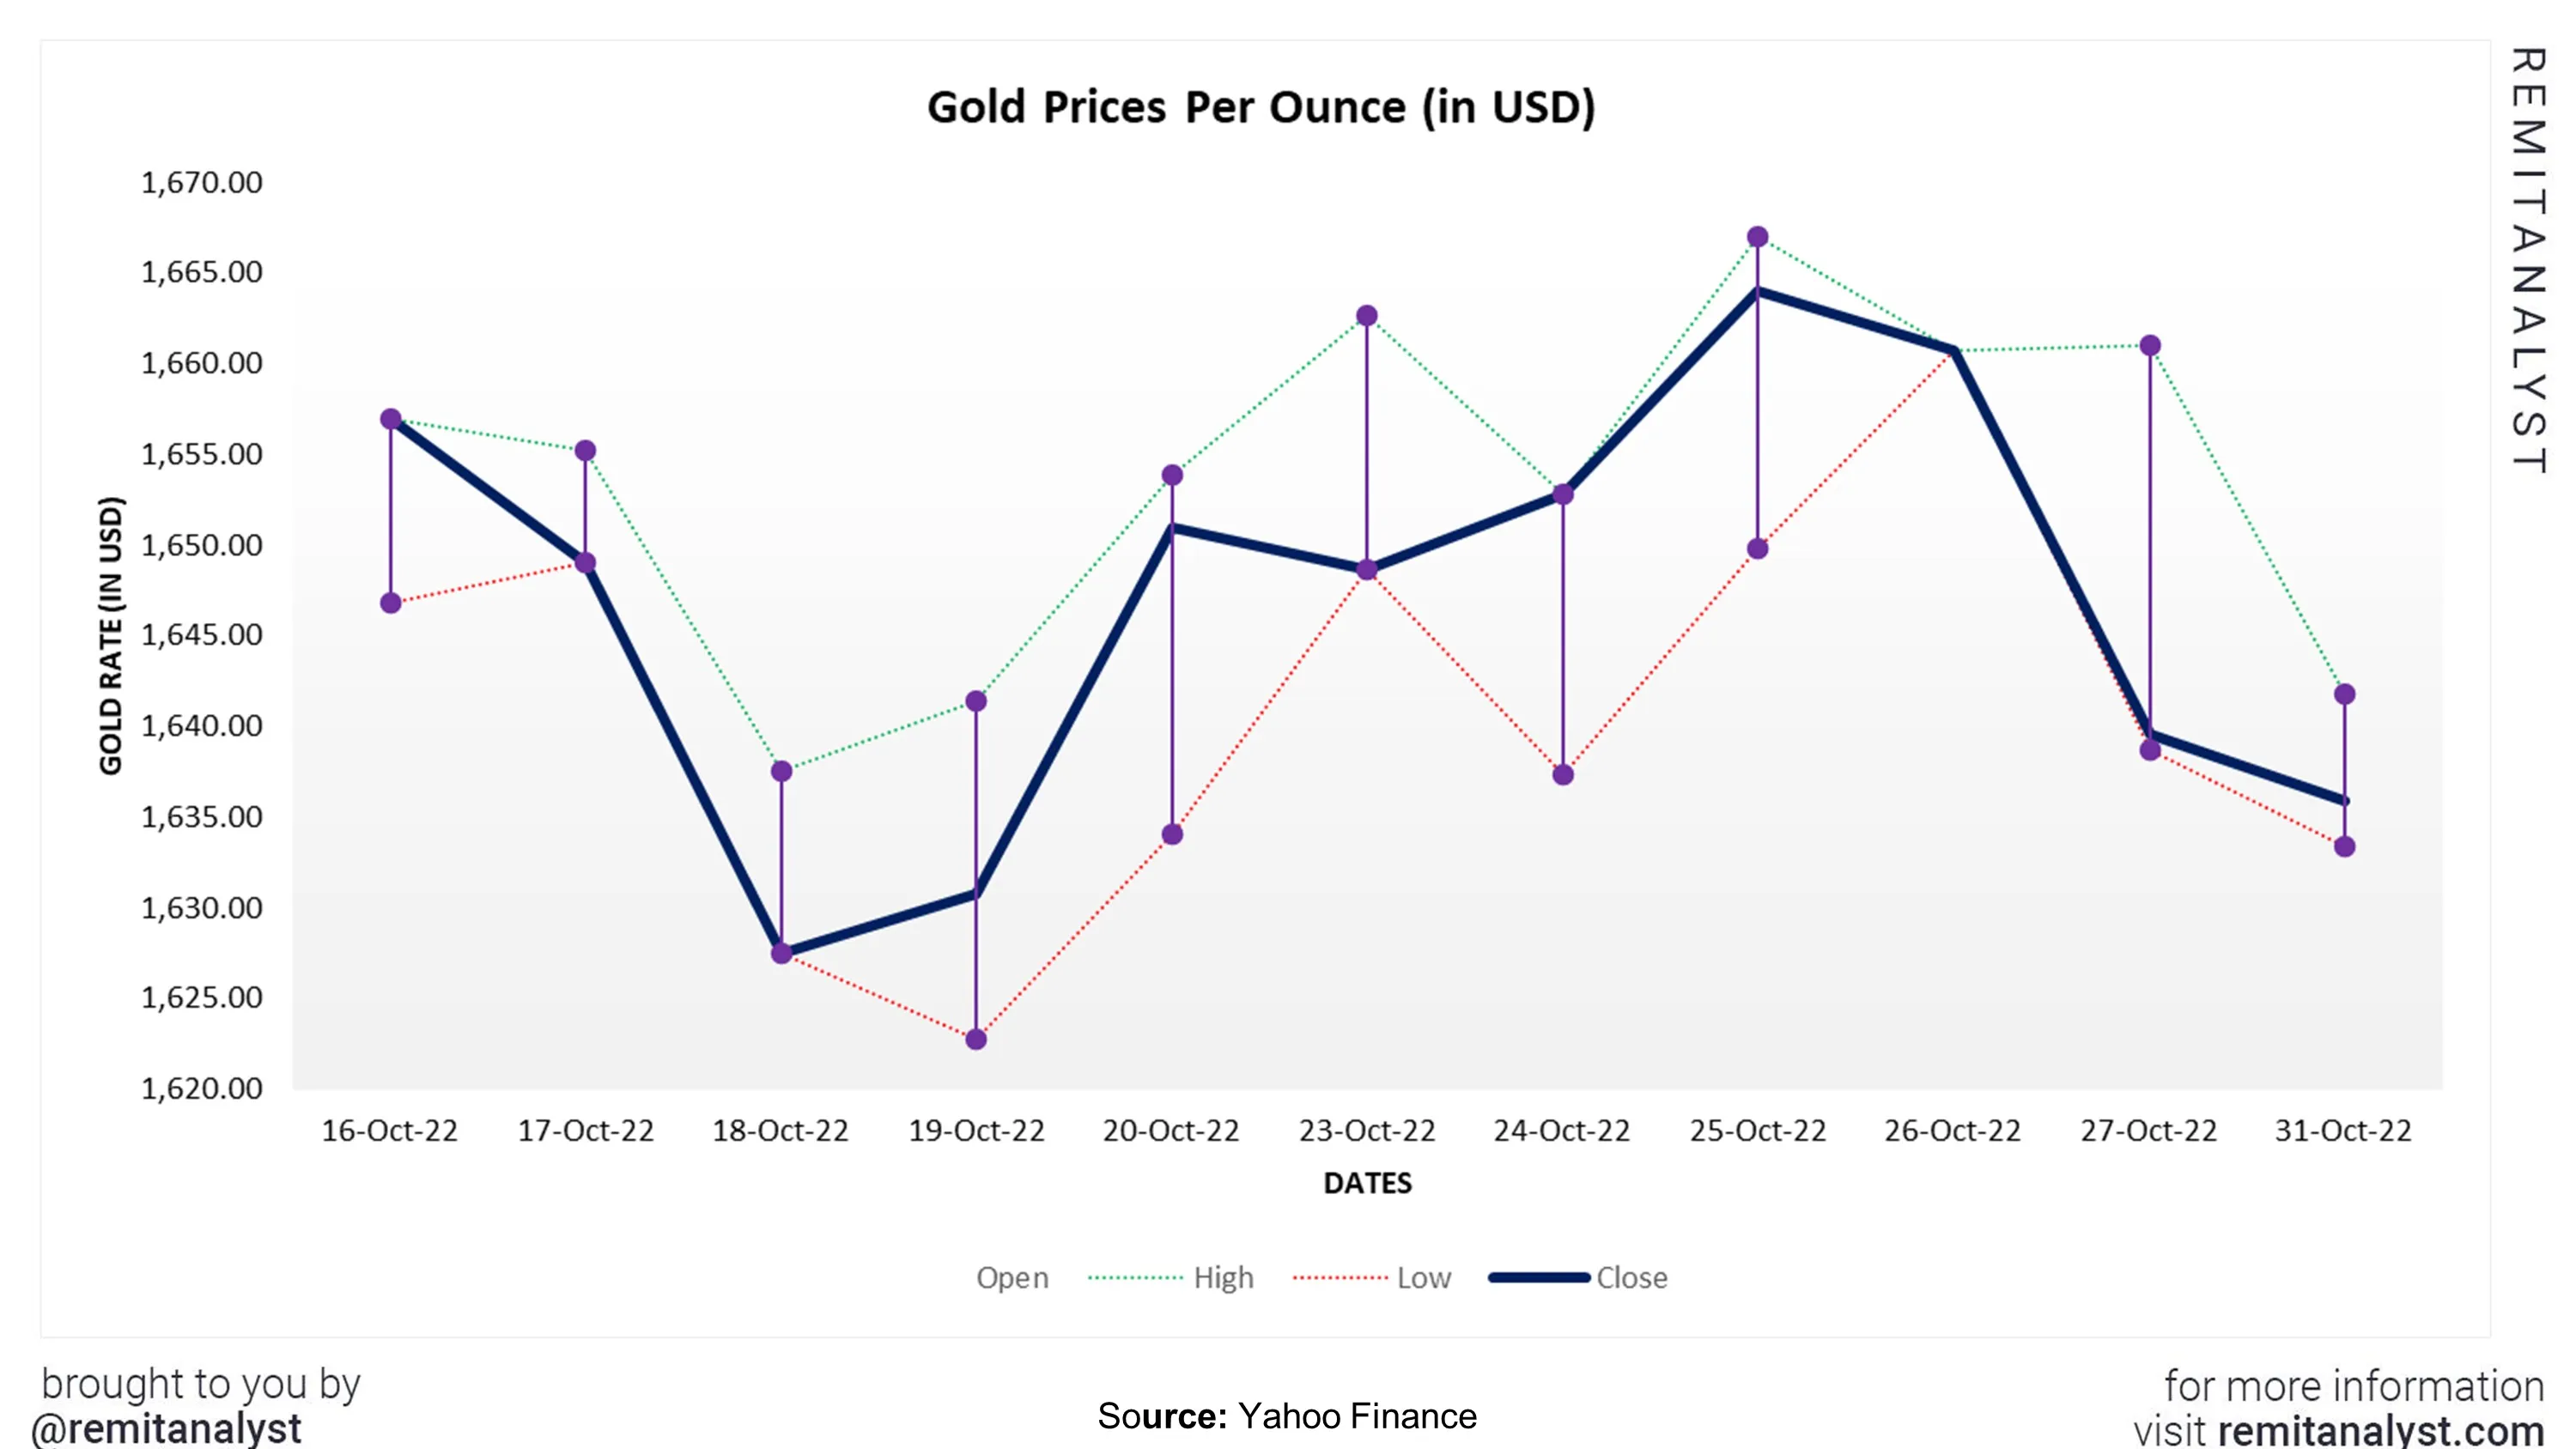 gold-prices-from-16-oct-2022-to-31-oct-2022